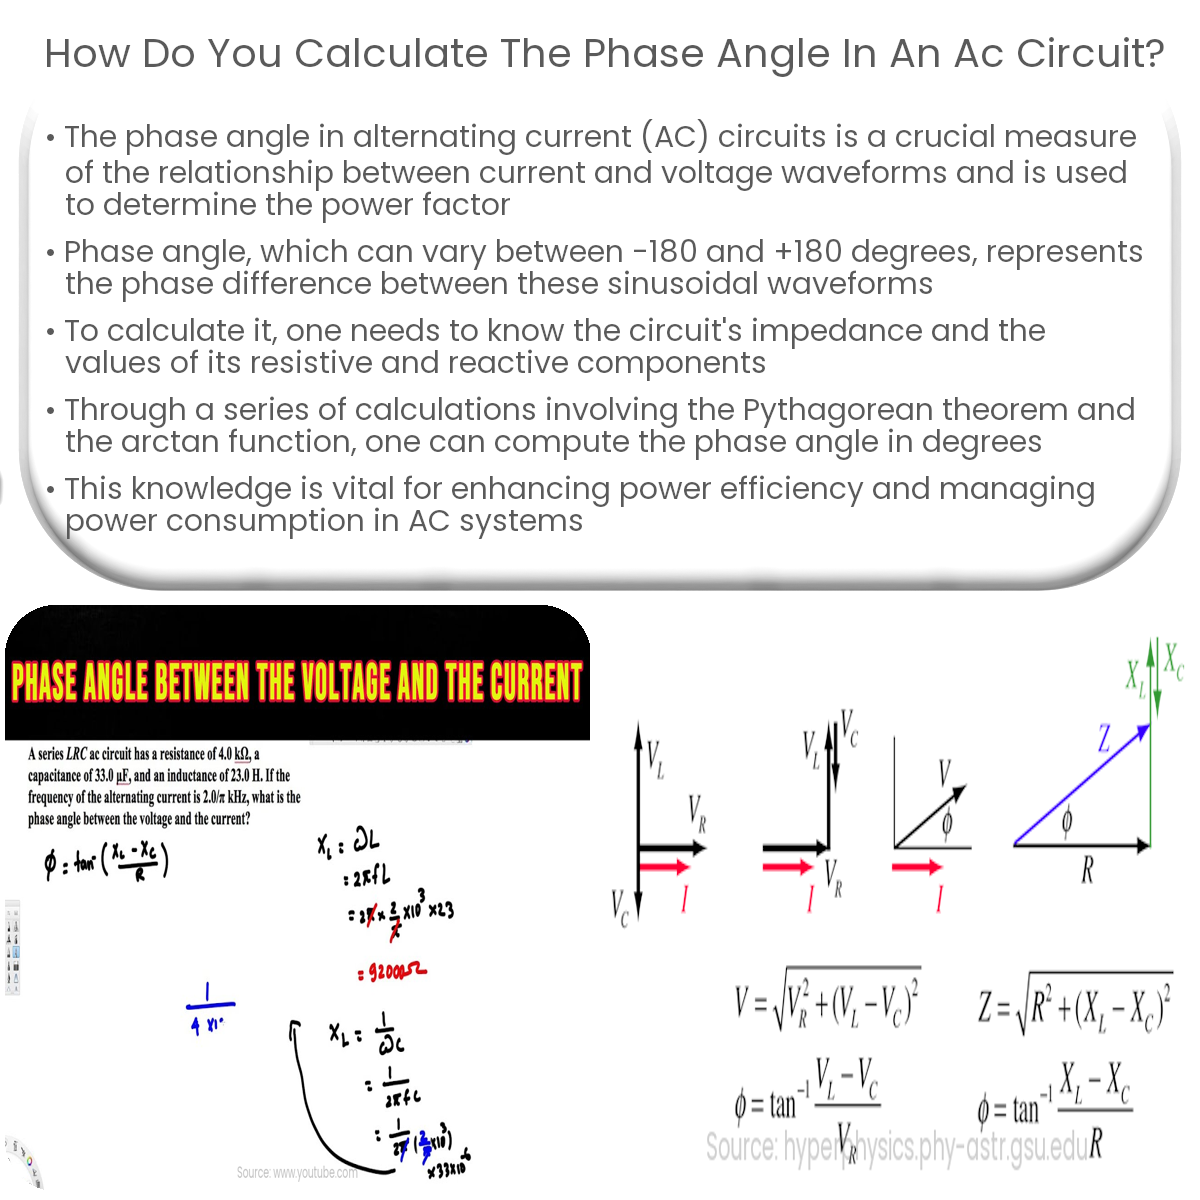 How do you calculate the phase angle in an AC circuit?